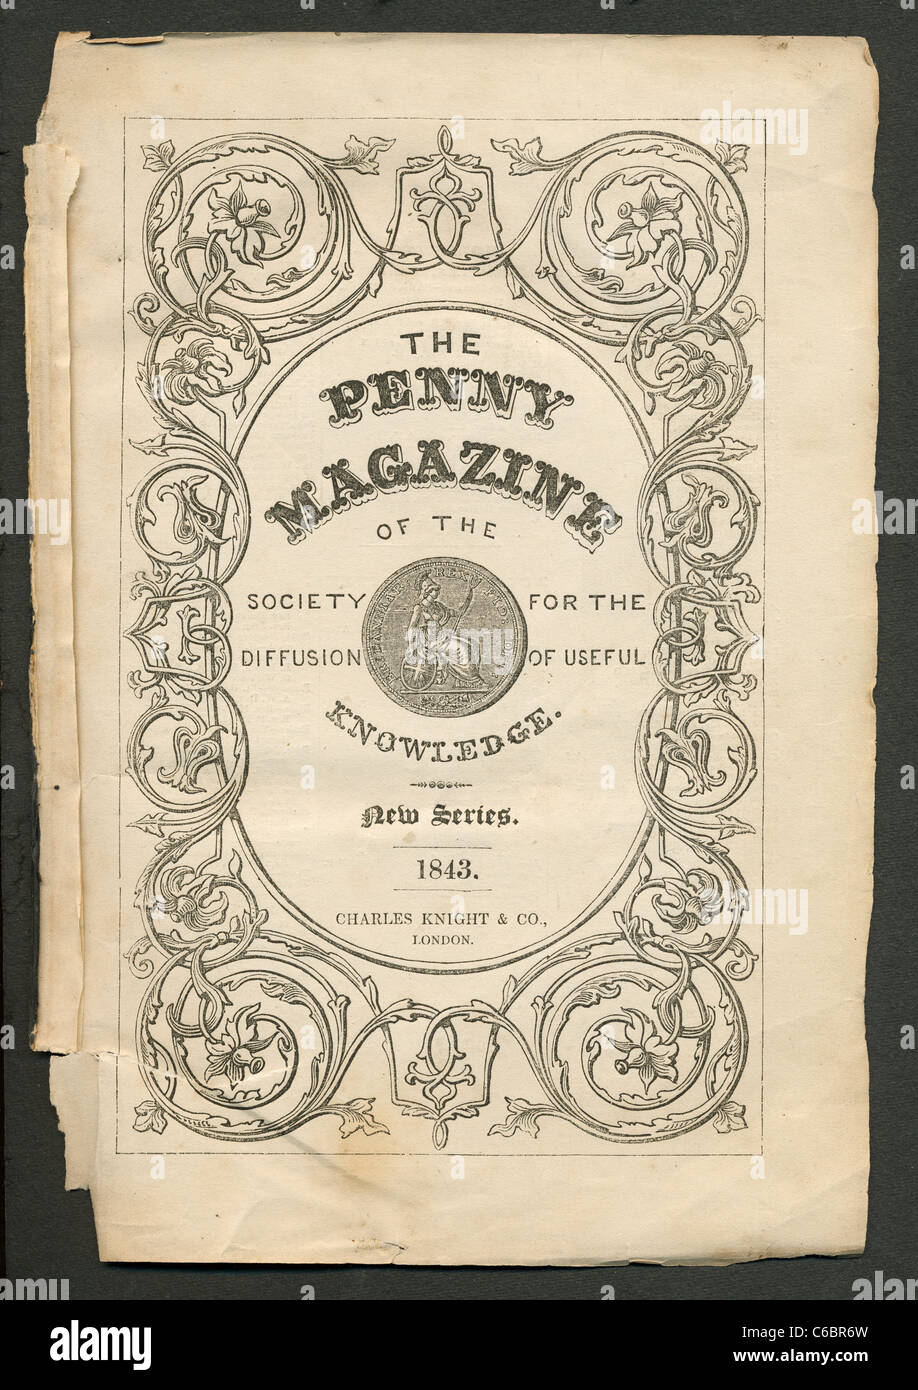 Title page of english 'The Penny Magazine of the society for the diffusion of useful knowledge' bound copy printed in 1843. Stock Photo